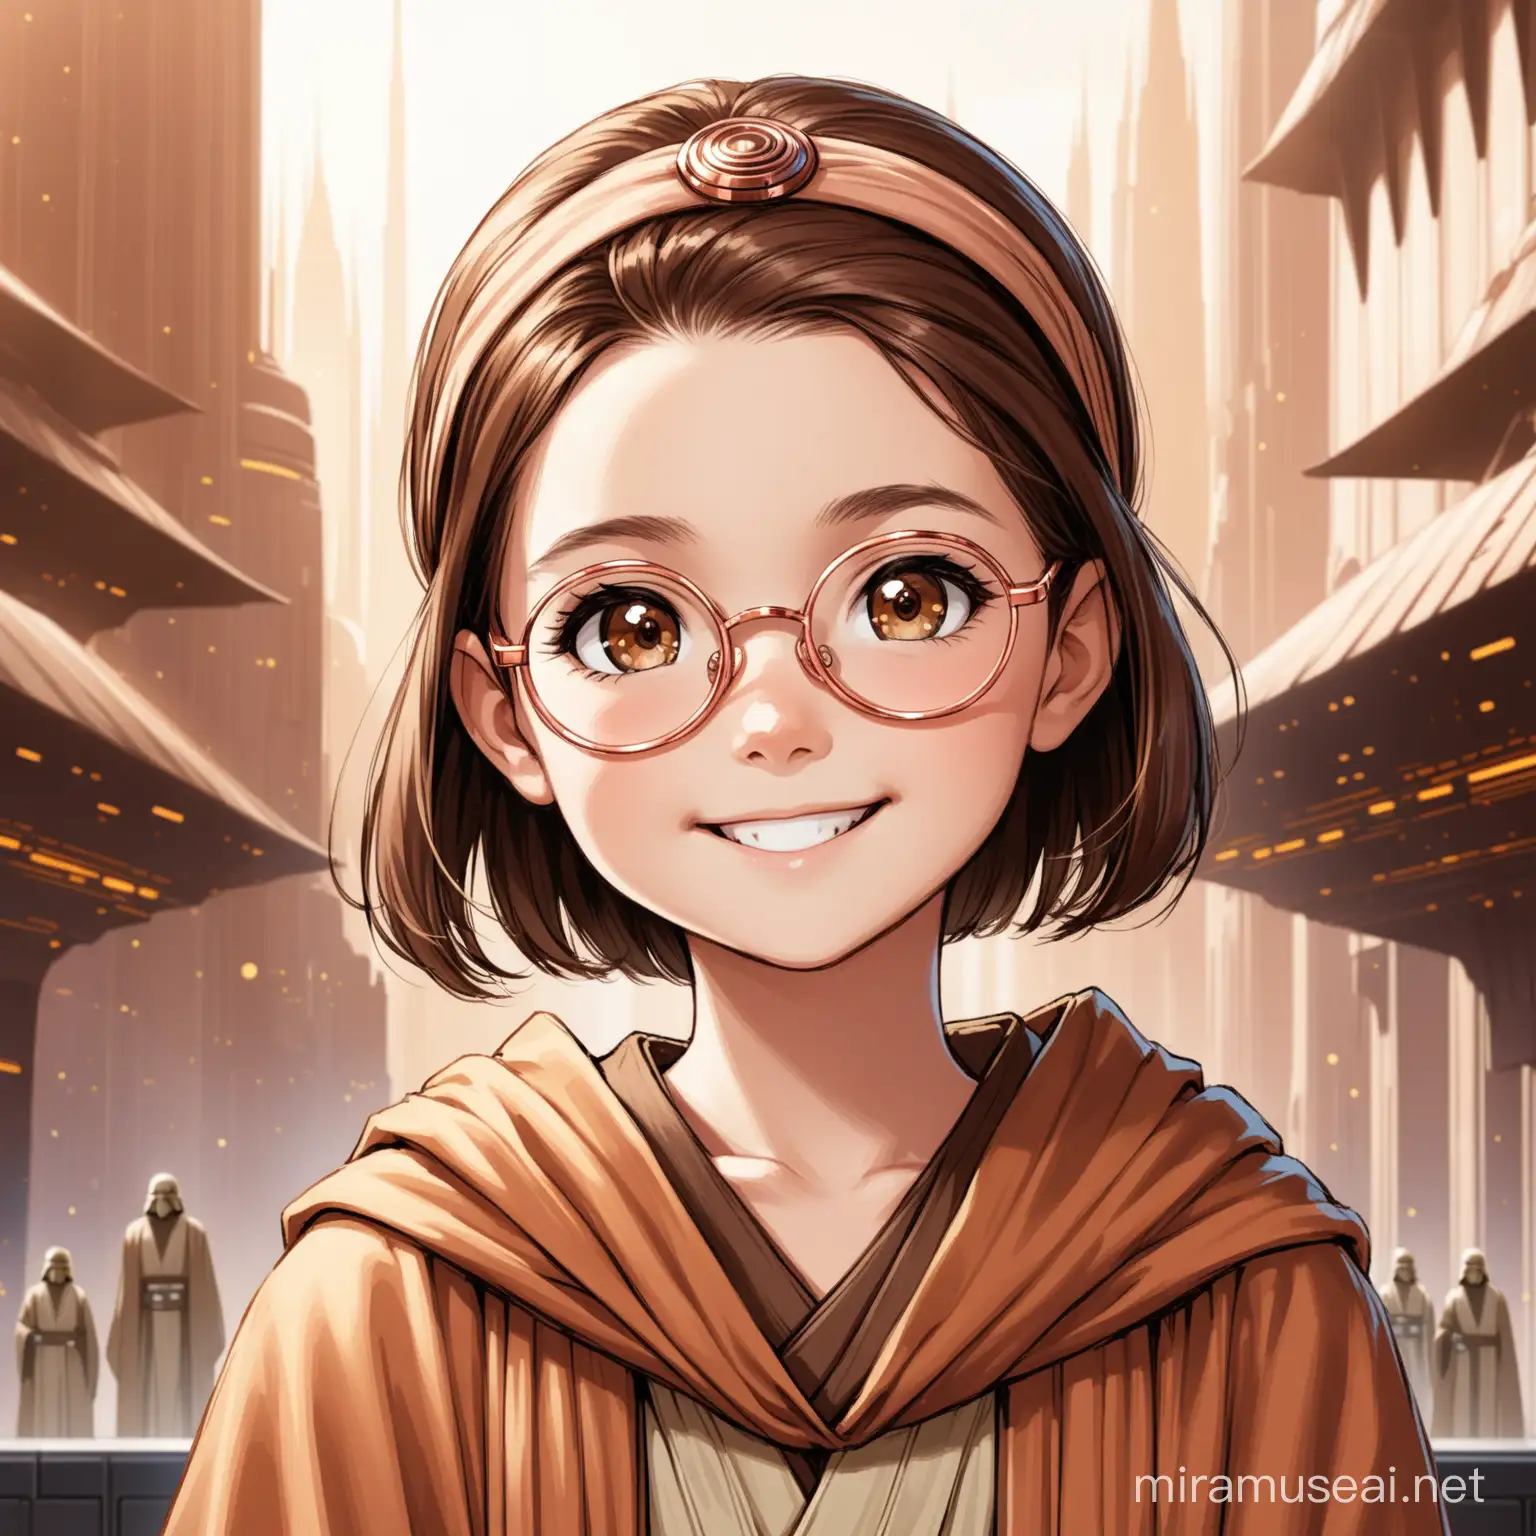 12 year old girl, short brown hair, brown eyes, rose gold glasses, smiling, headband, jedi robes, on coruscant